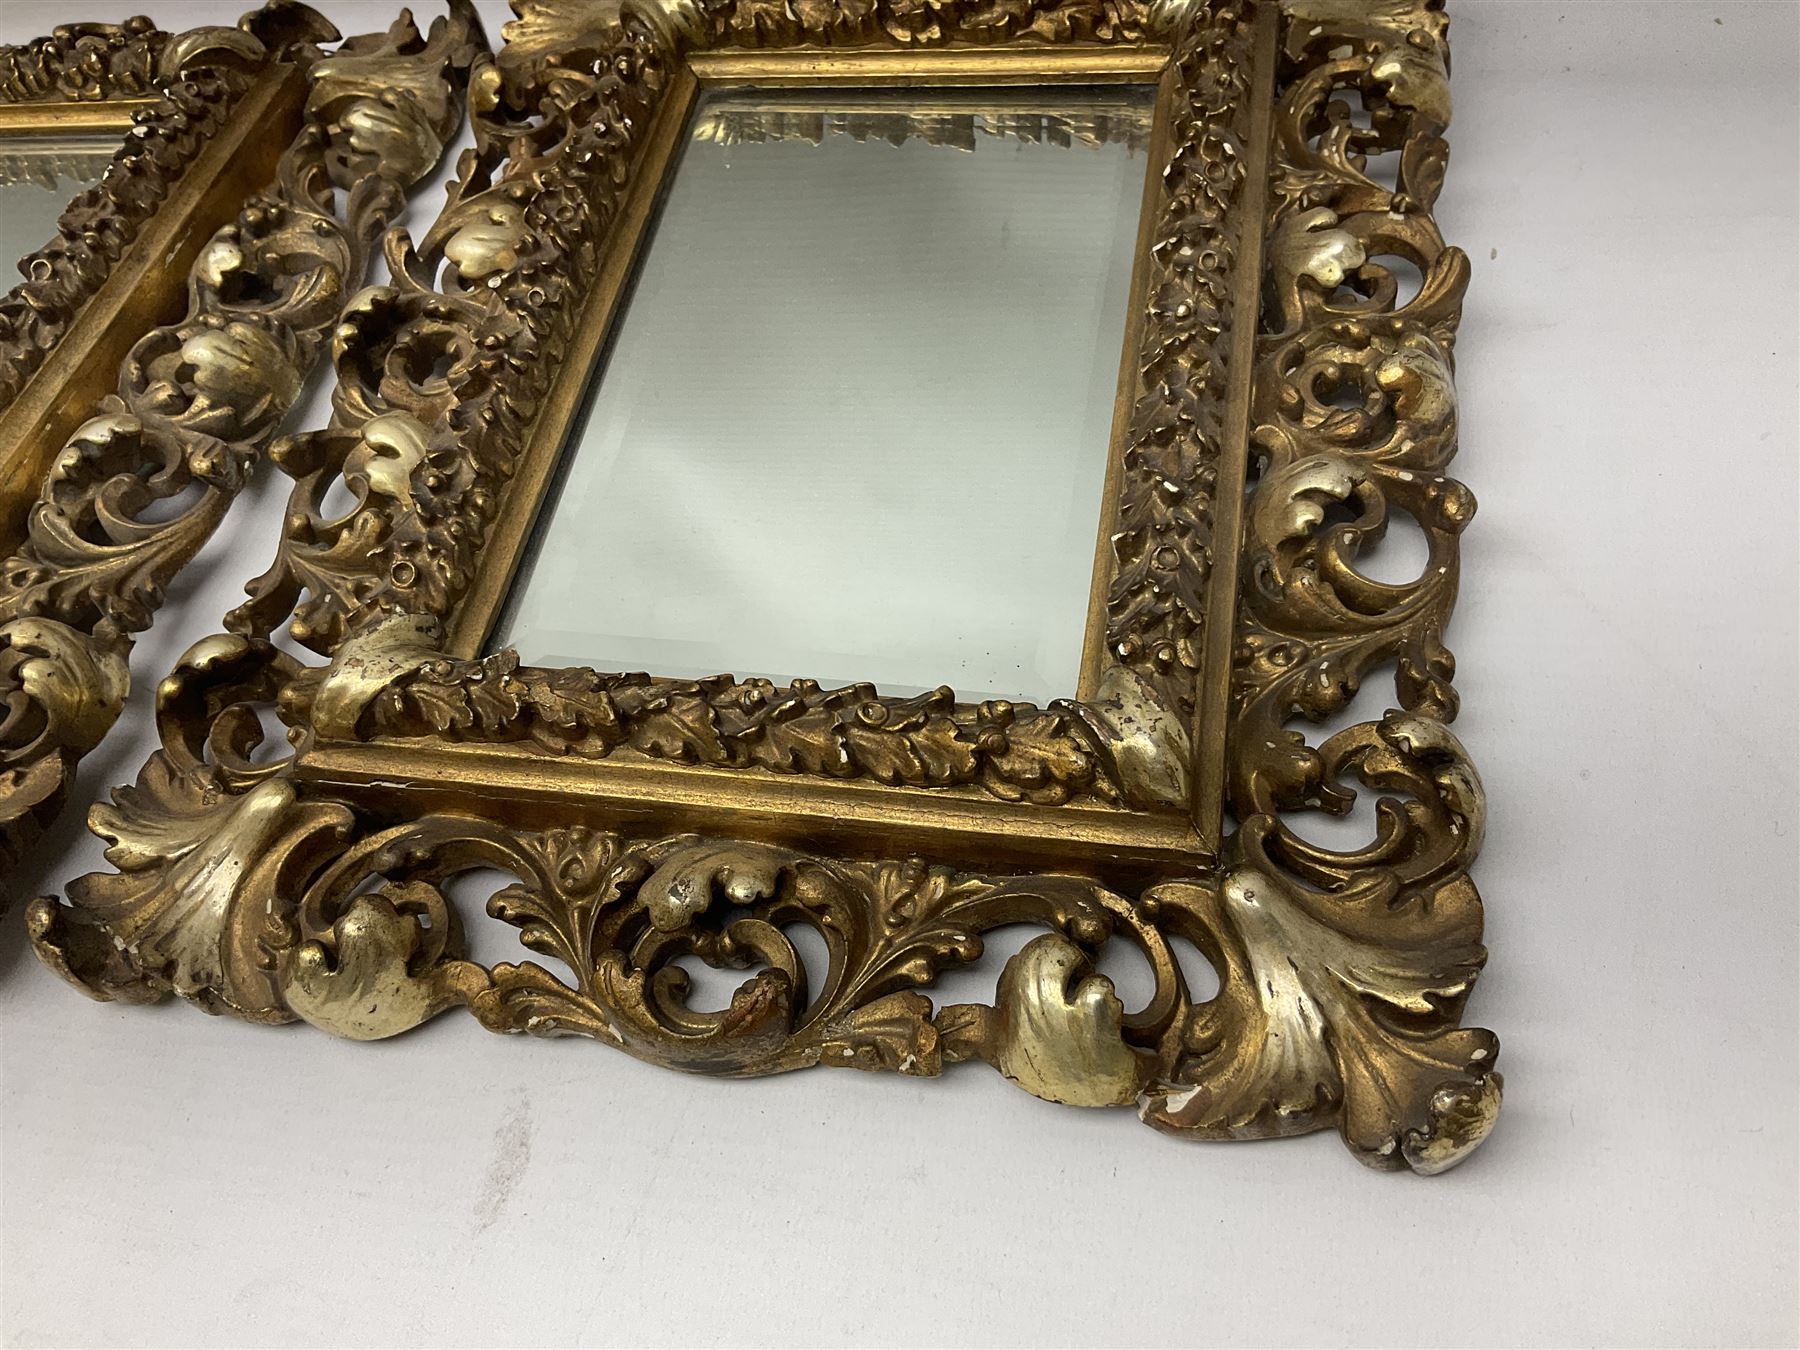 Pair of Florentine carved giltwood mirrors - Image 6 of 11